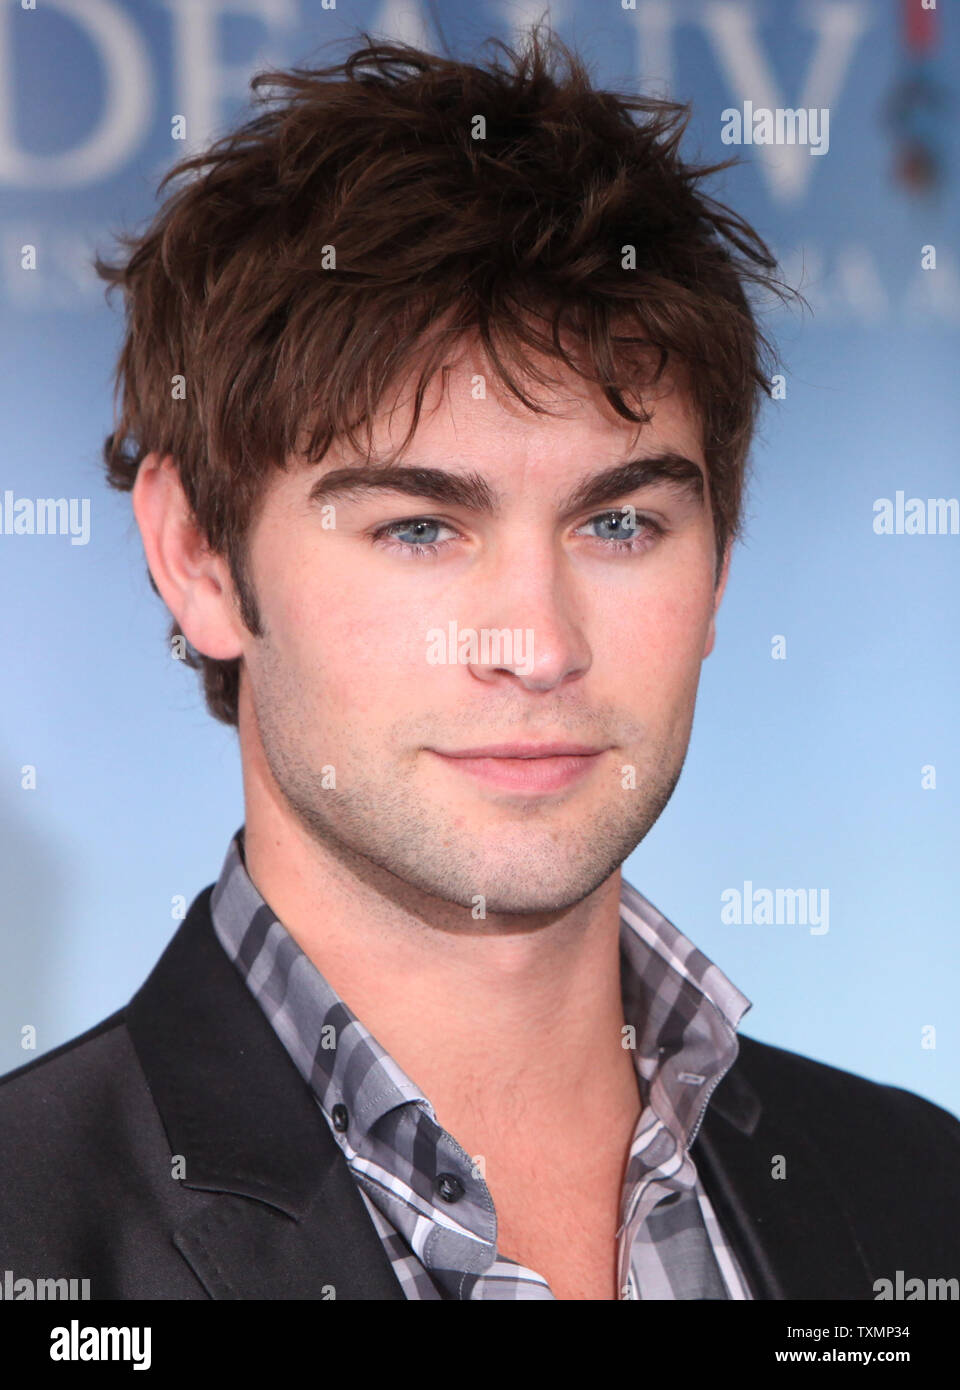 Chace Crawford arrives at a photocall for the film "Twelve" during the 36th American Film Festival of Deauville in Deauville, France on September 5, 2010.    UPI/David Silpa Stock Photo